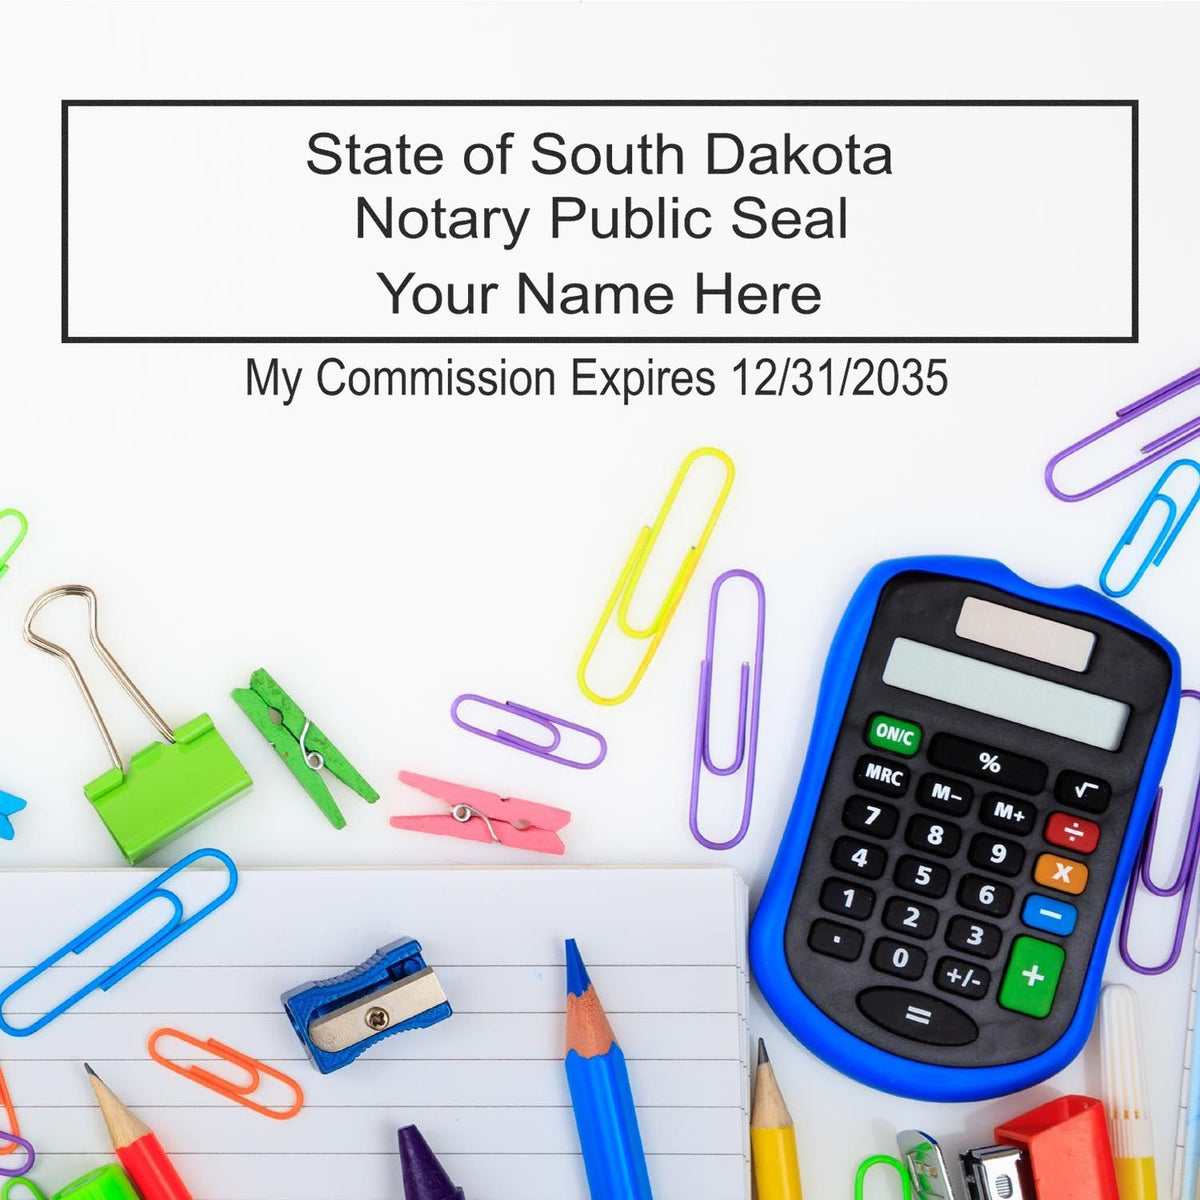 PSI South Dakota Notary Stamp in use photo showing a stamped imprint of the PSI South Dakota Notary Stamp